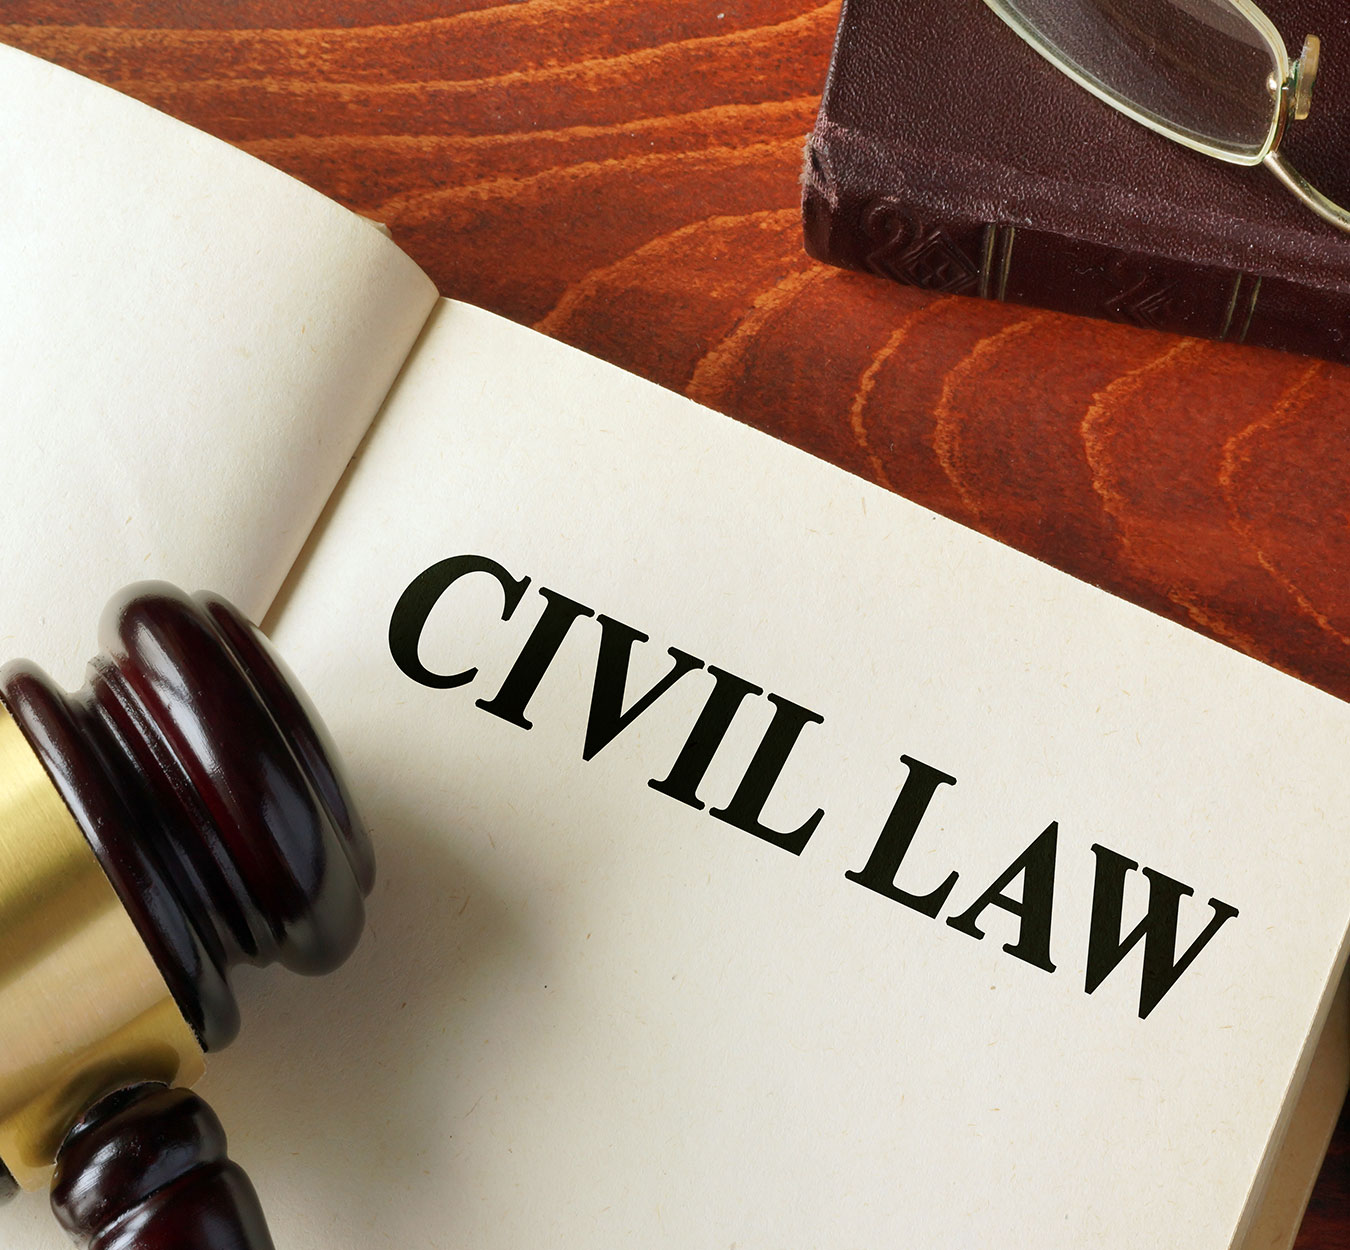 Inherent Powers of the Court Under the Civil Procedure Code